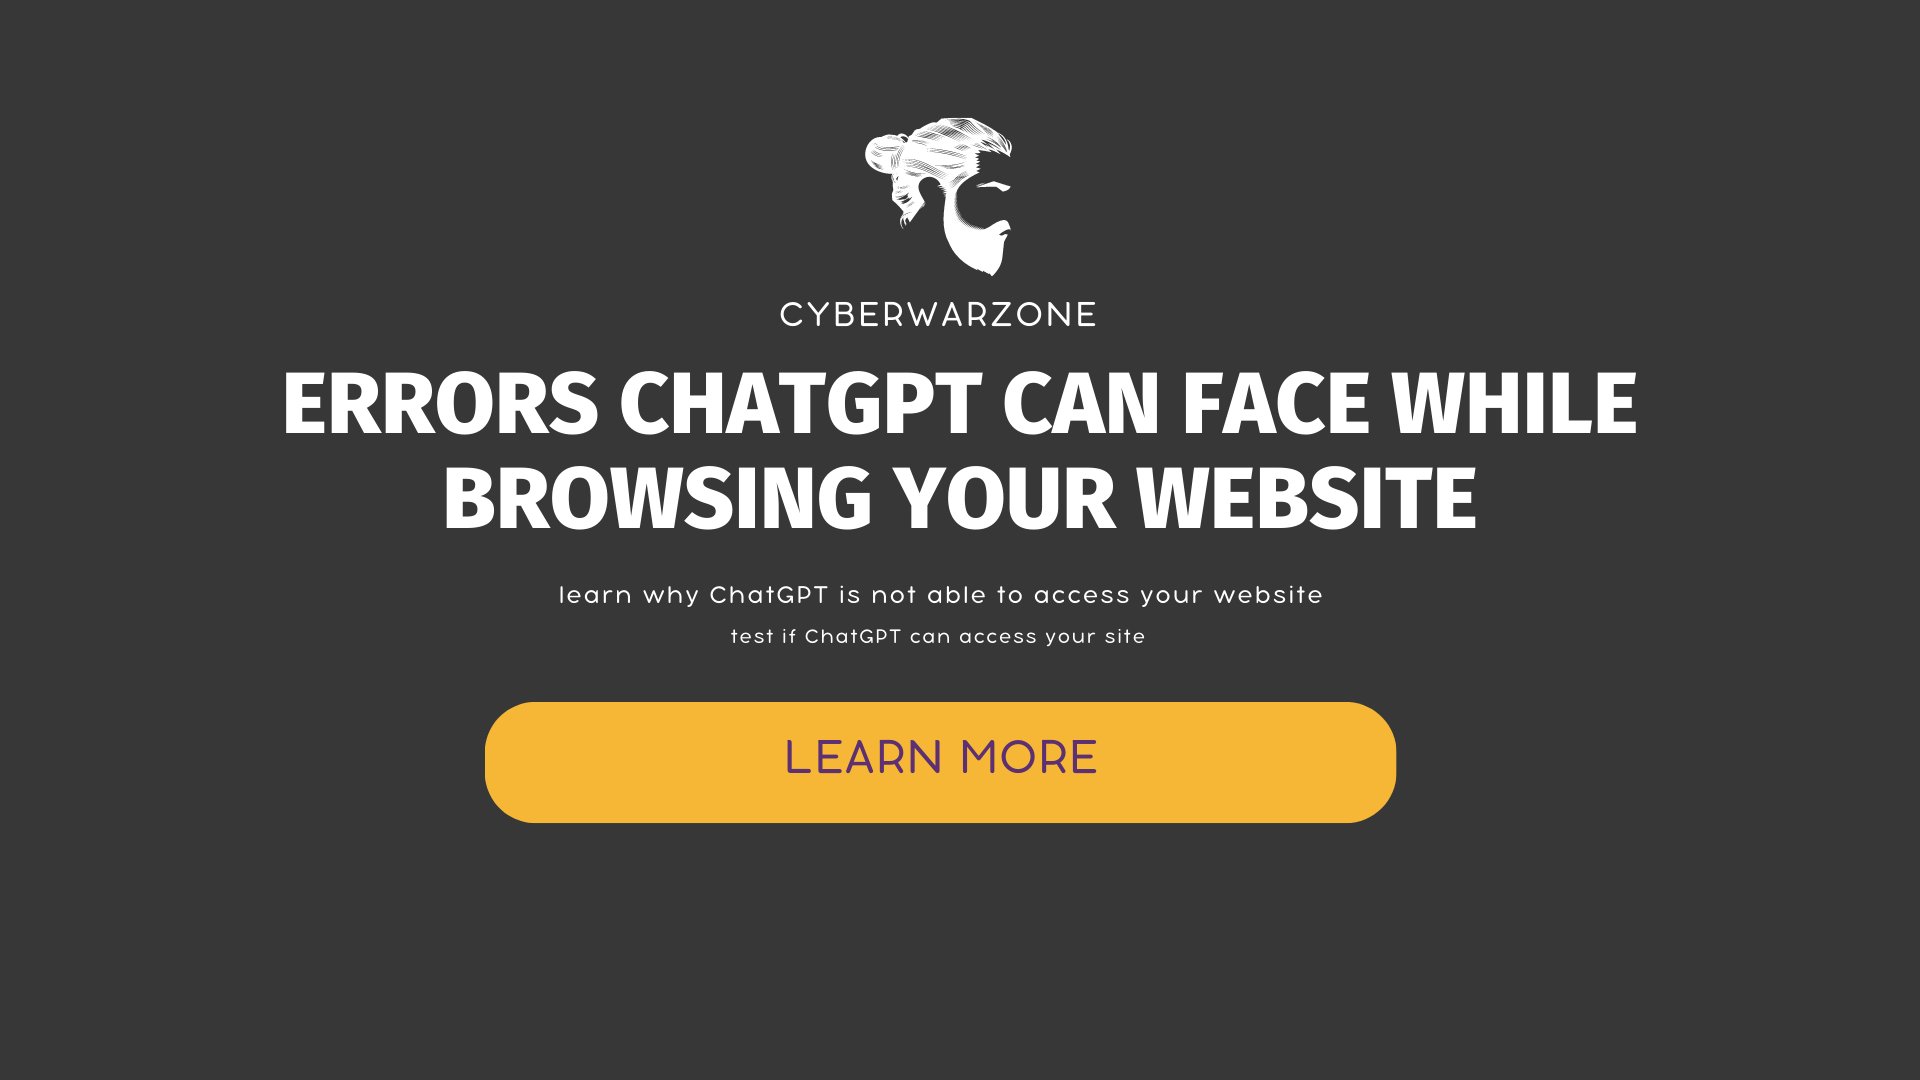 Errors ChatGPT can face while browsing your website